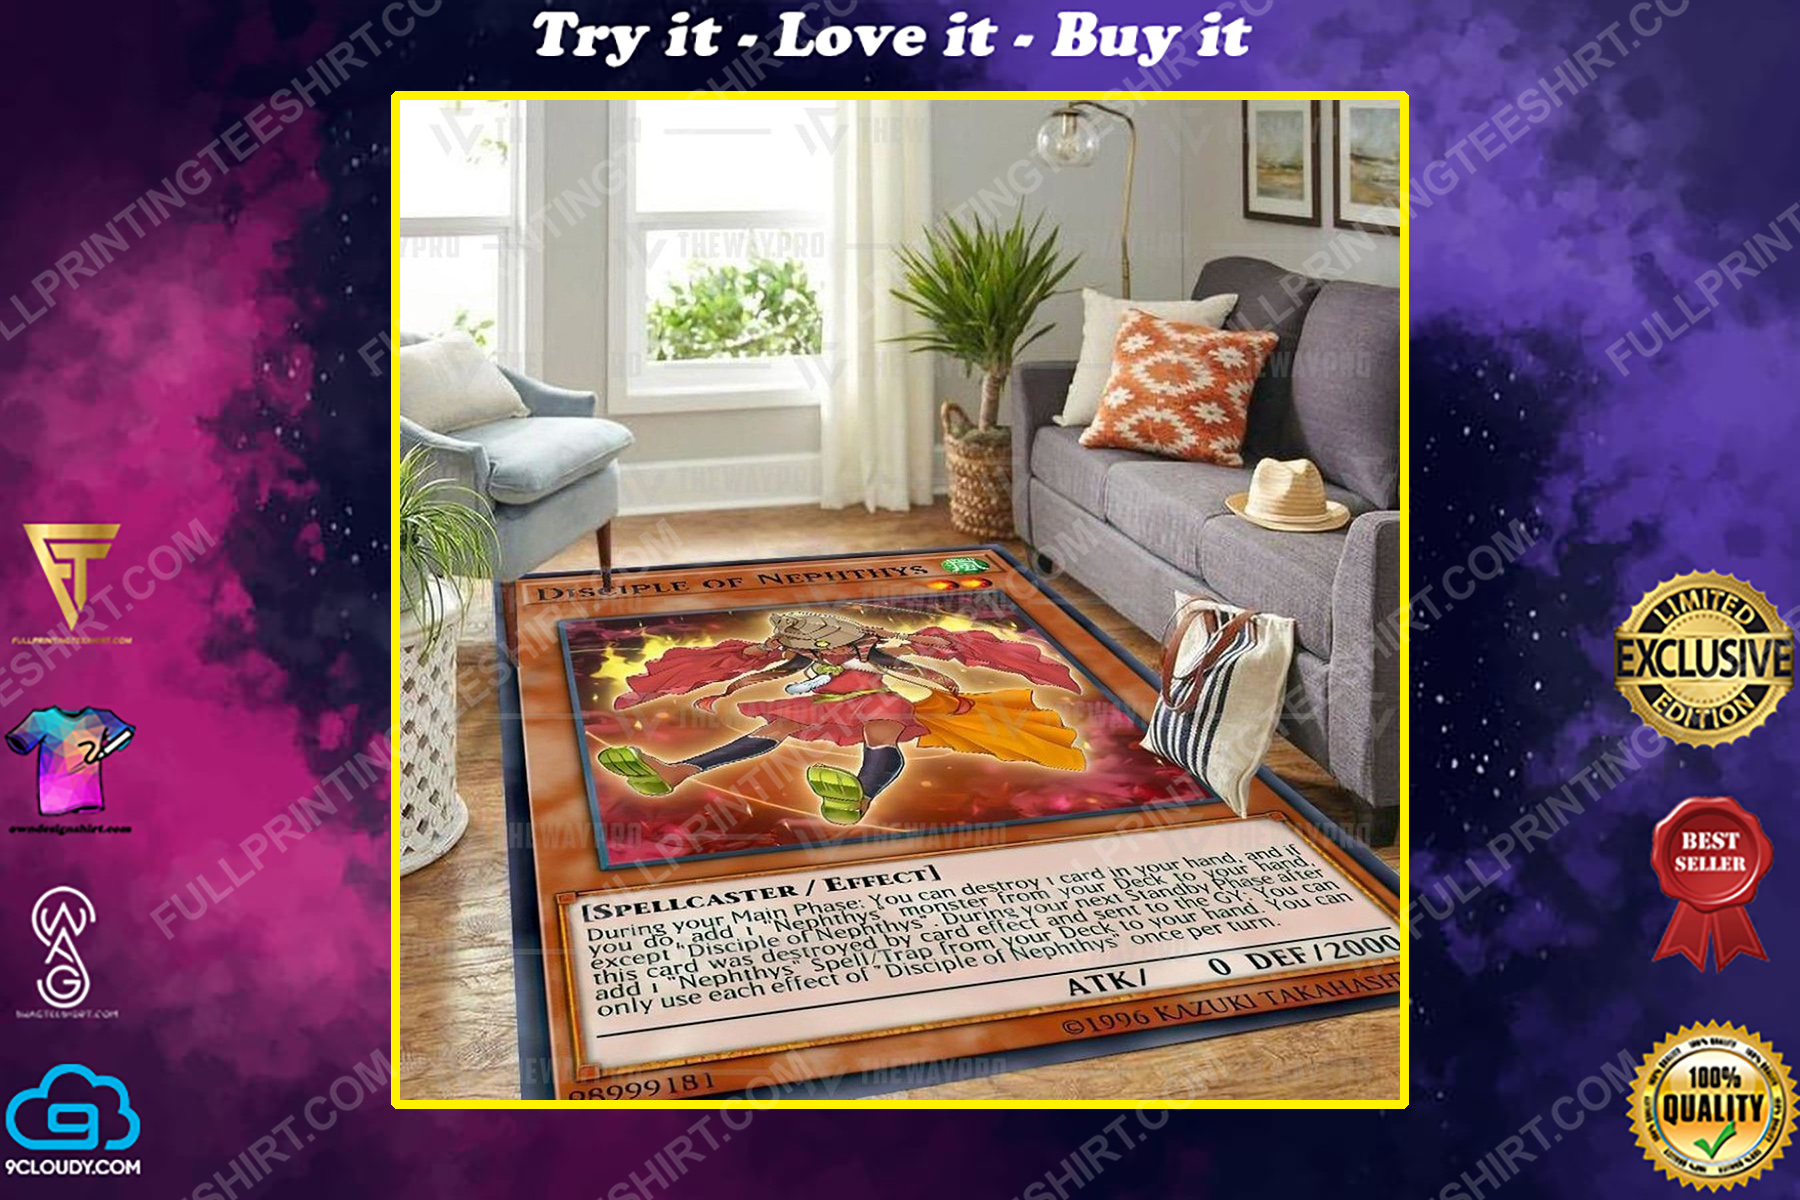 Yu-gi-oh disciple of nephthys all over print rug